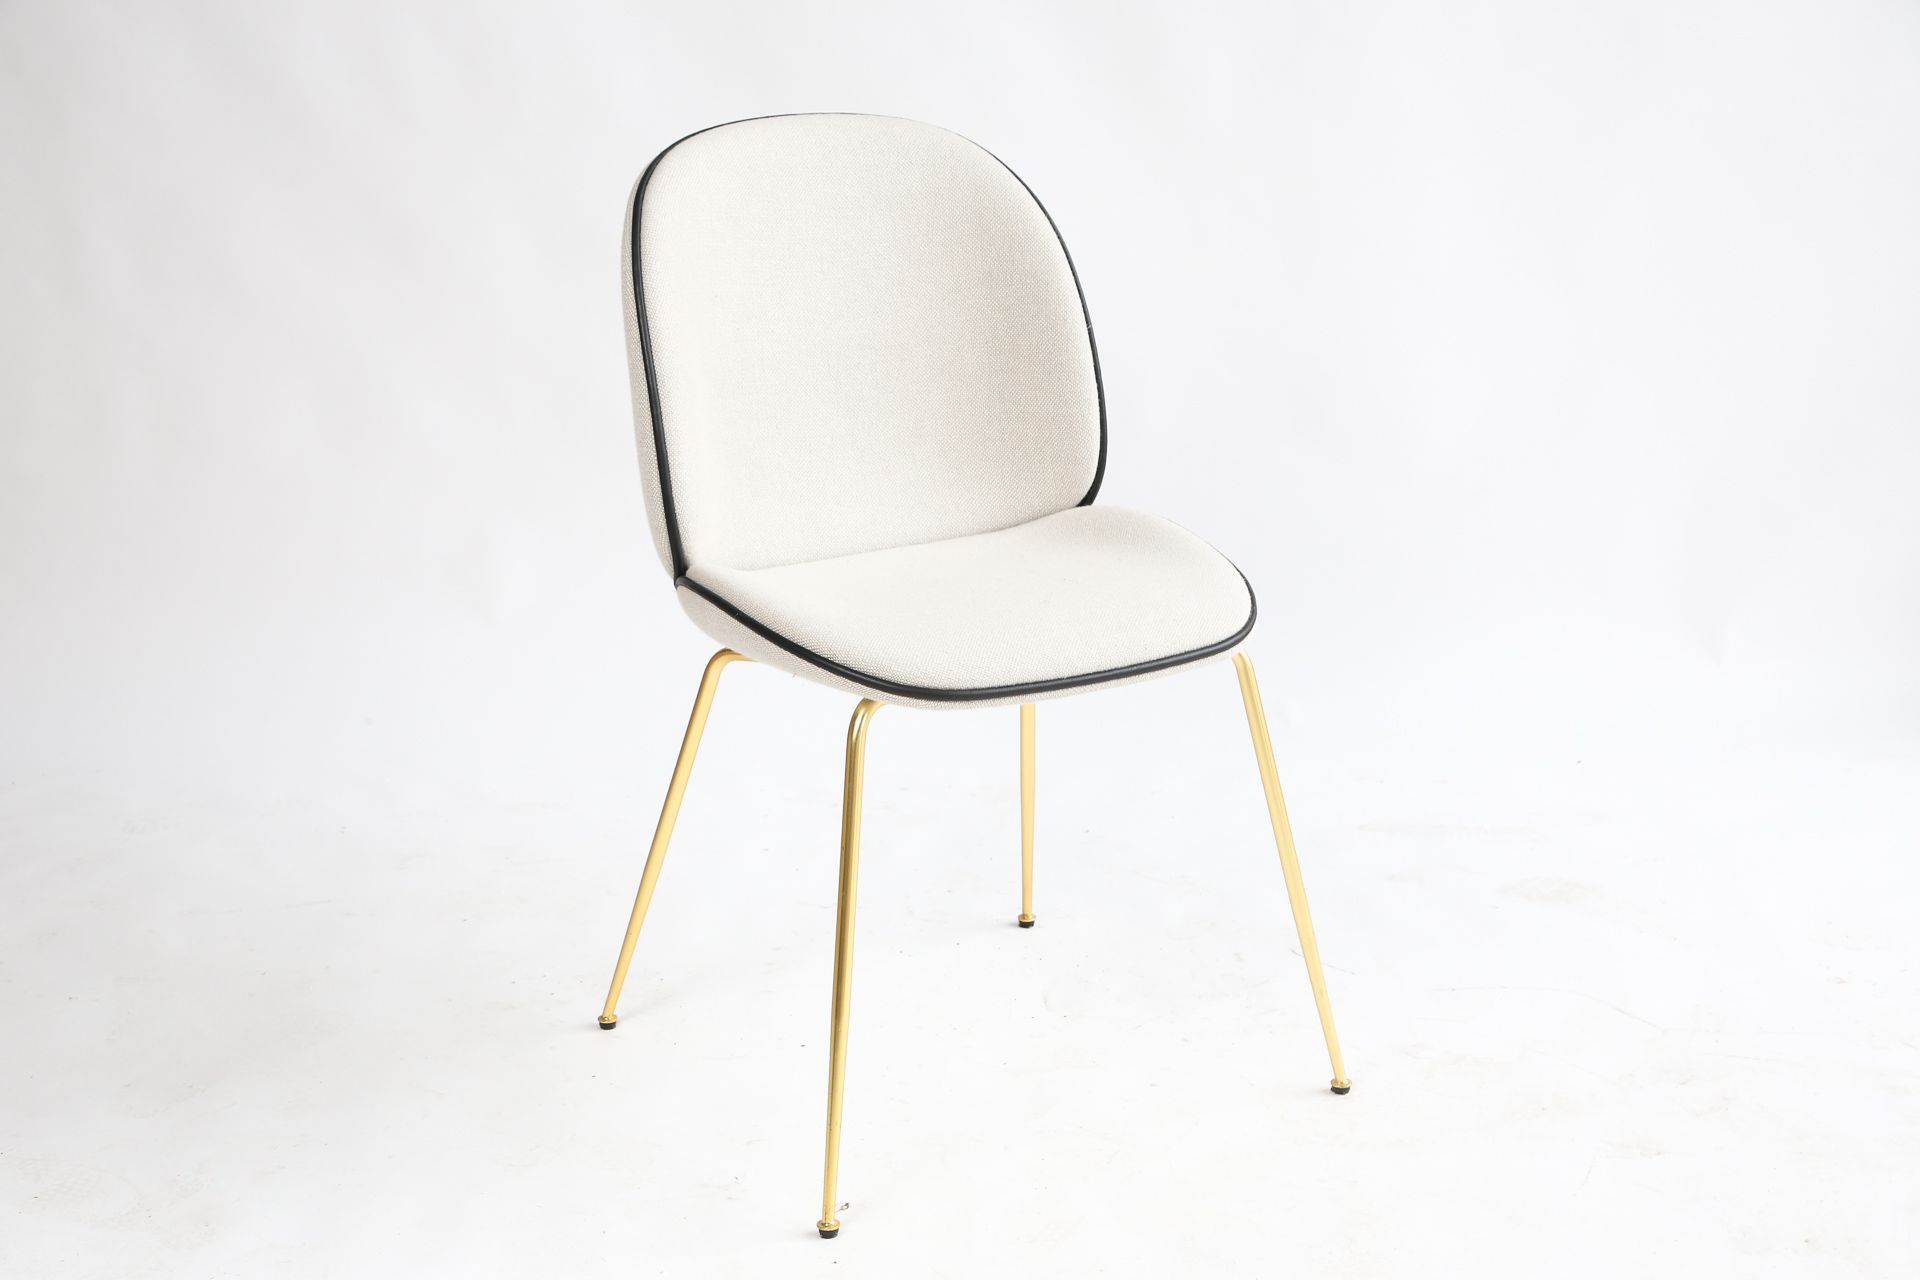 Null GUBI, Beetle Dining Chair - Fully Upholstered, conic base

Gubi

4 conical &hellip;